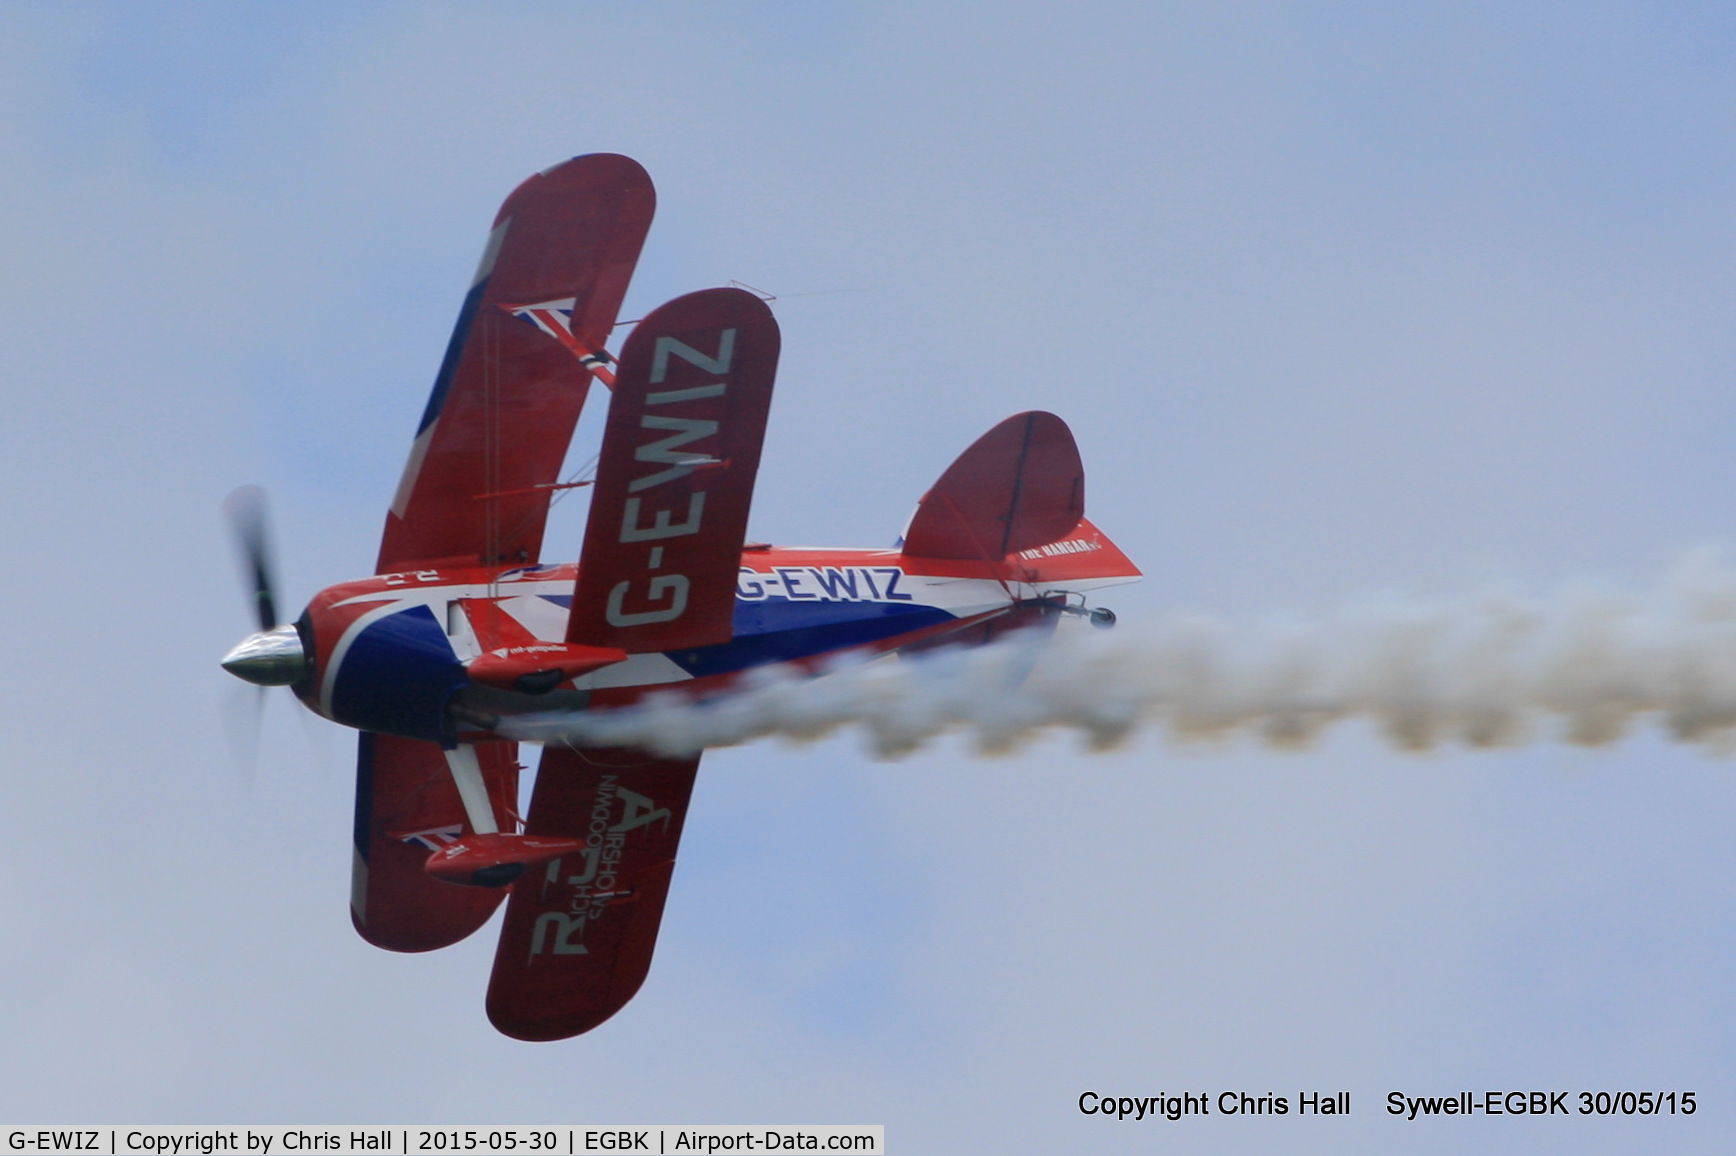 G-EWIZ, 1981 Pitts S-2S Special C/N S18, at Aeroexpo 2015